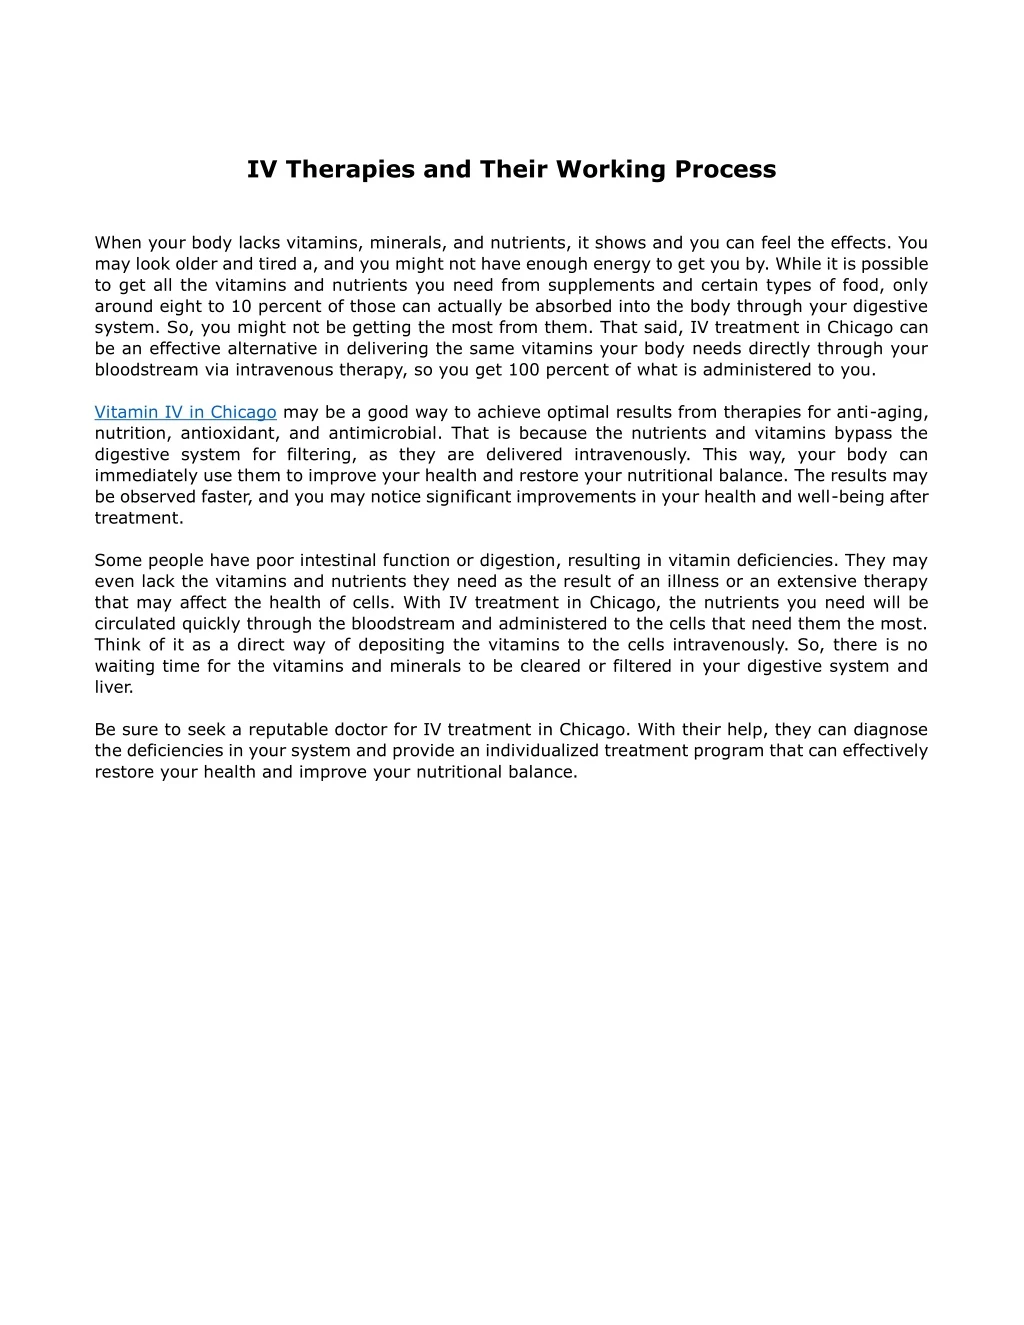 iv therapies and their working process